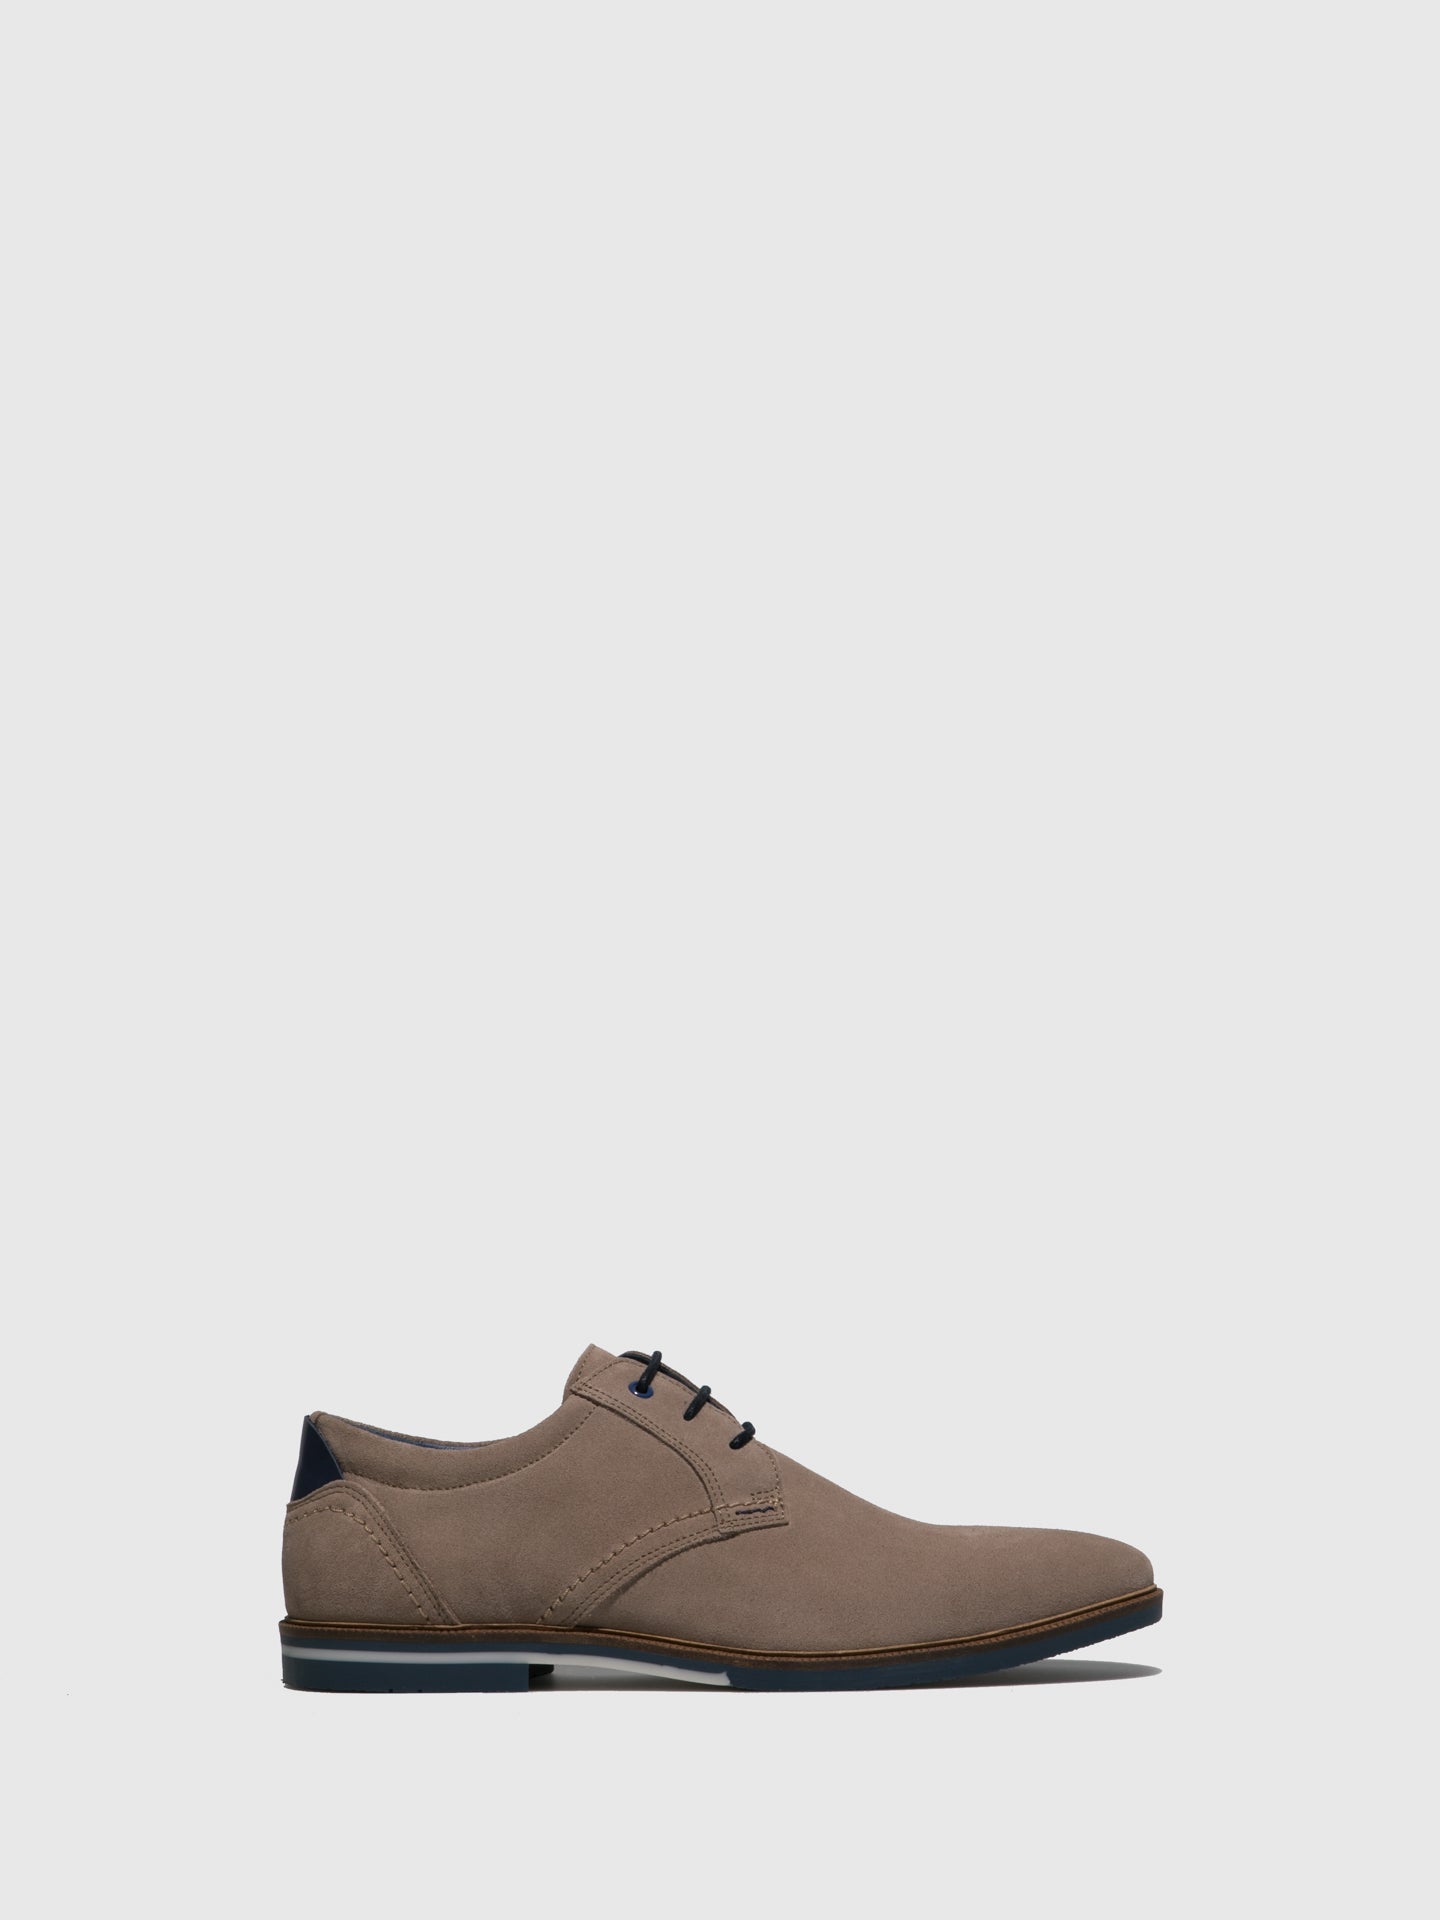 Foreva Wheat Derby Shoes